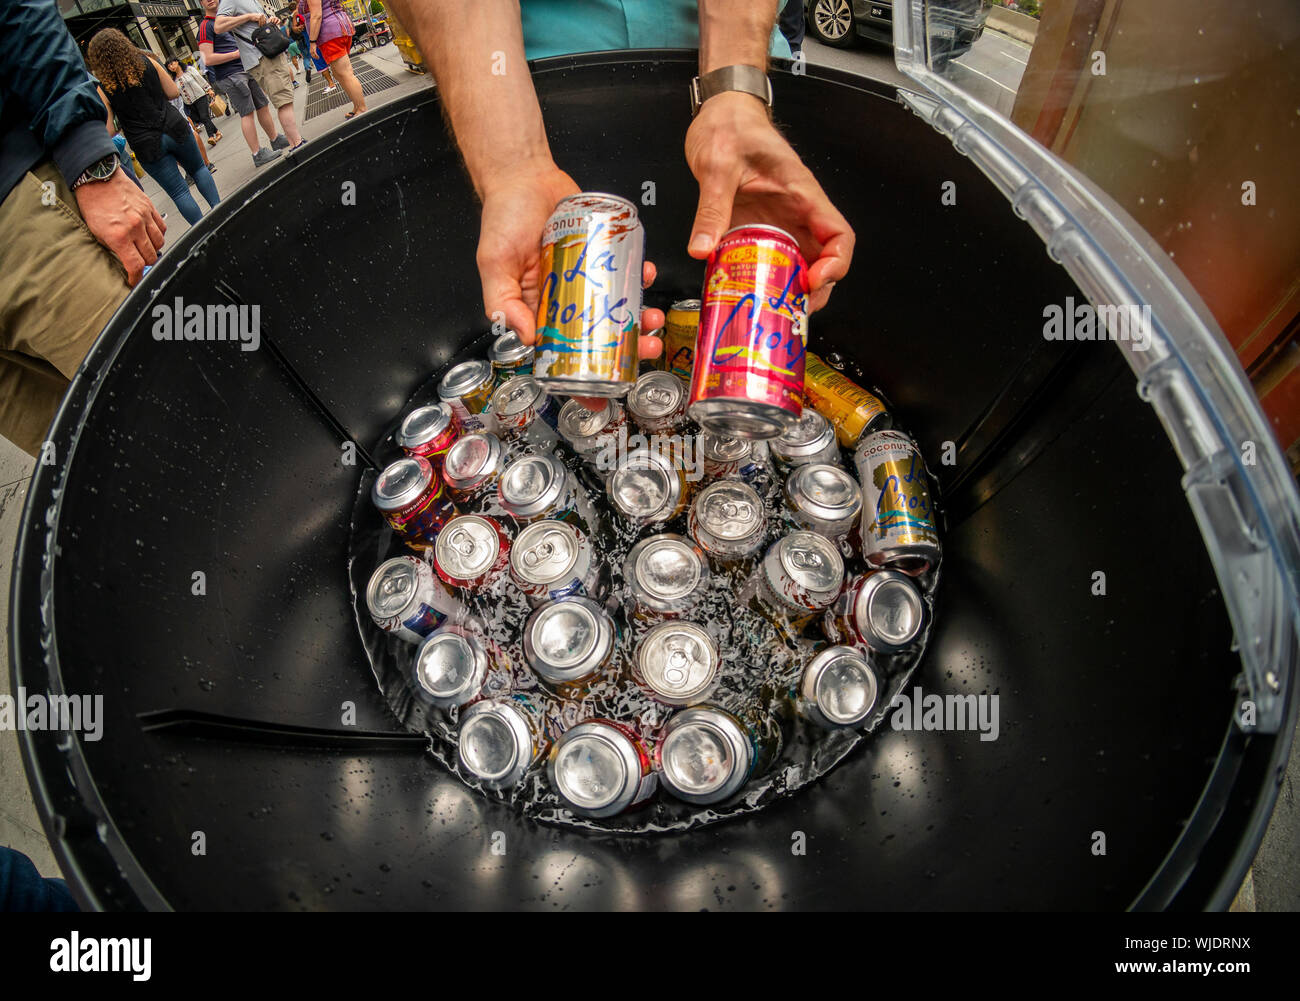 Workers distribute free cans of LaCroix sparkling water’s new flavors at a branding event in the Flatiron neighborhood of New York on Friday, August 23, 2019. Once the darling of millennials, sales of National Beverage Corp.’s LaCroix have fallen precipitously as they face increased competition from “Big Soda”, i.e. Pepsi and Coca-Cola coming out with similar brands. (© Richard B. Levine) Stock Photo